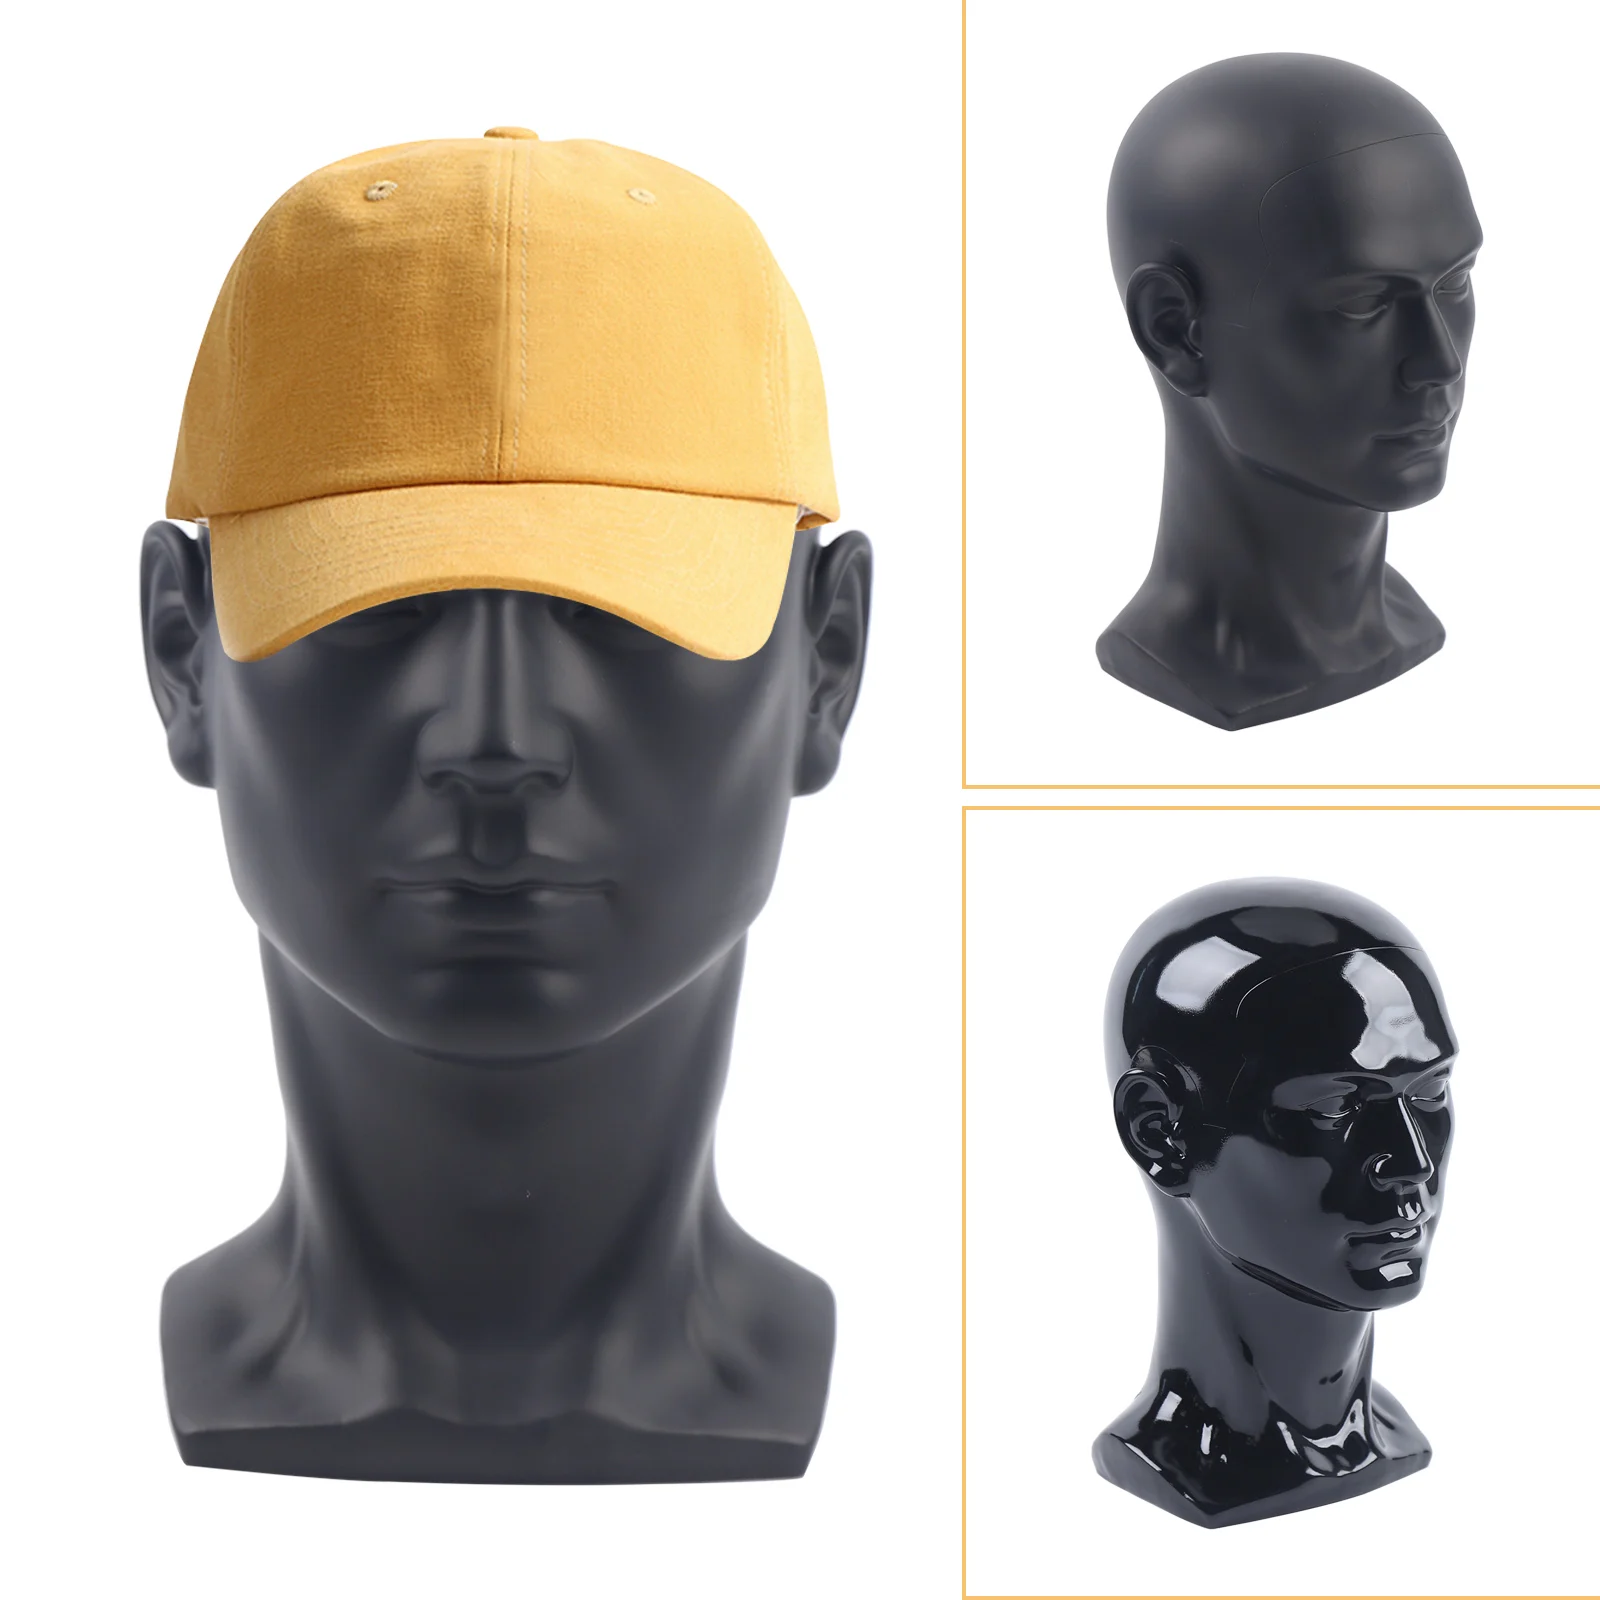 

Mannequin Head For Headphones Hats Wigs Jewellery Black Made Of High Quality Pvc Plastic Wig Holder Polystyrene Head